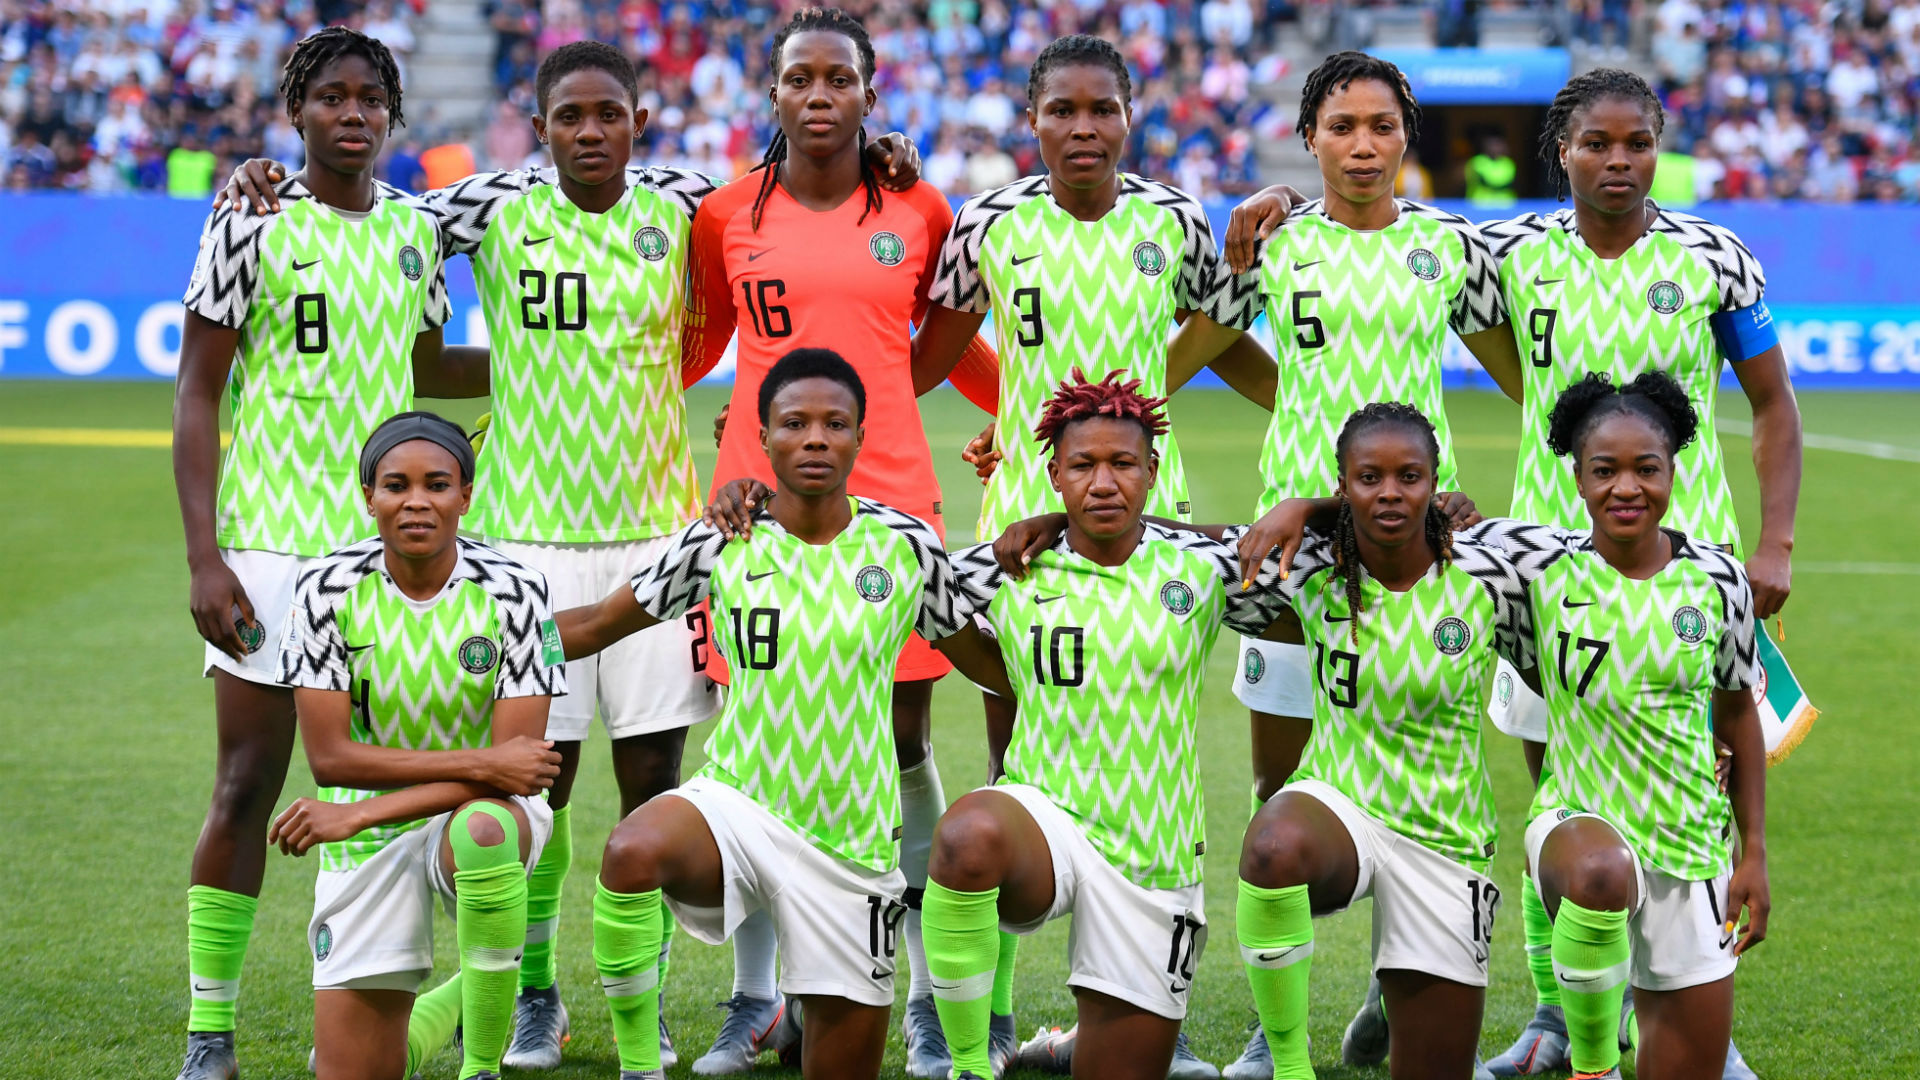 Nigeria beat England, Australia and Germany to win best Women's World Cup jersey